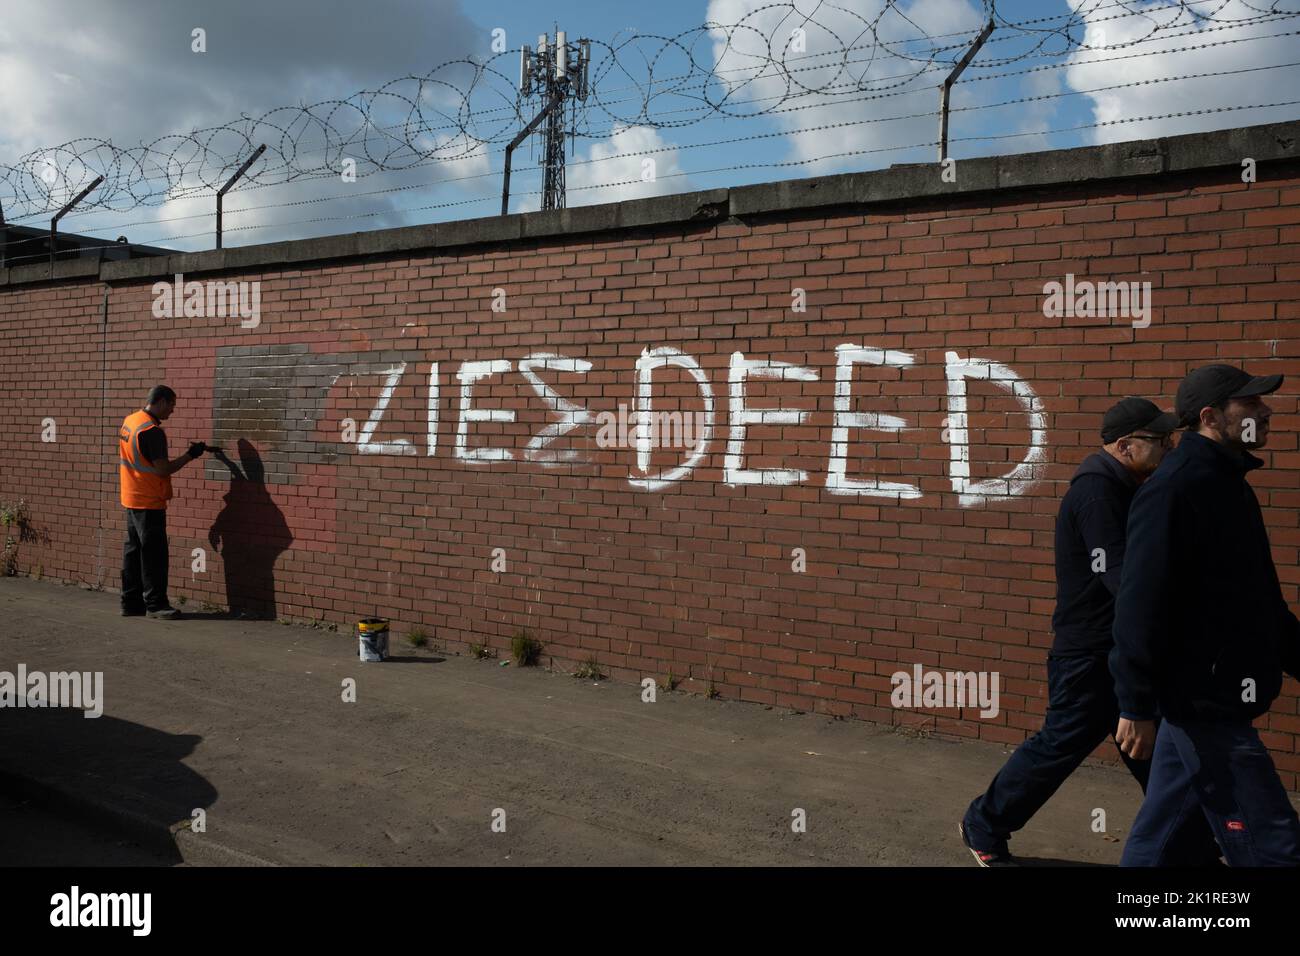 Glasgow Scotland, 20 September 2022. A transport worker paints over anti-monarchy graffiti reading “Lizzie’s deed” (Lizzie’s Dead), which appeared overnight in the Ibrox area of the city, on the day after the funeral of Her Majesty Queen Elizabeth II who died on 8th September, in Glasgow Scotland, 20 September 2022. Photo credit: Jeremy Sutton-Hibbert/Alamy Live News. Stock Photo